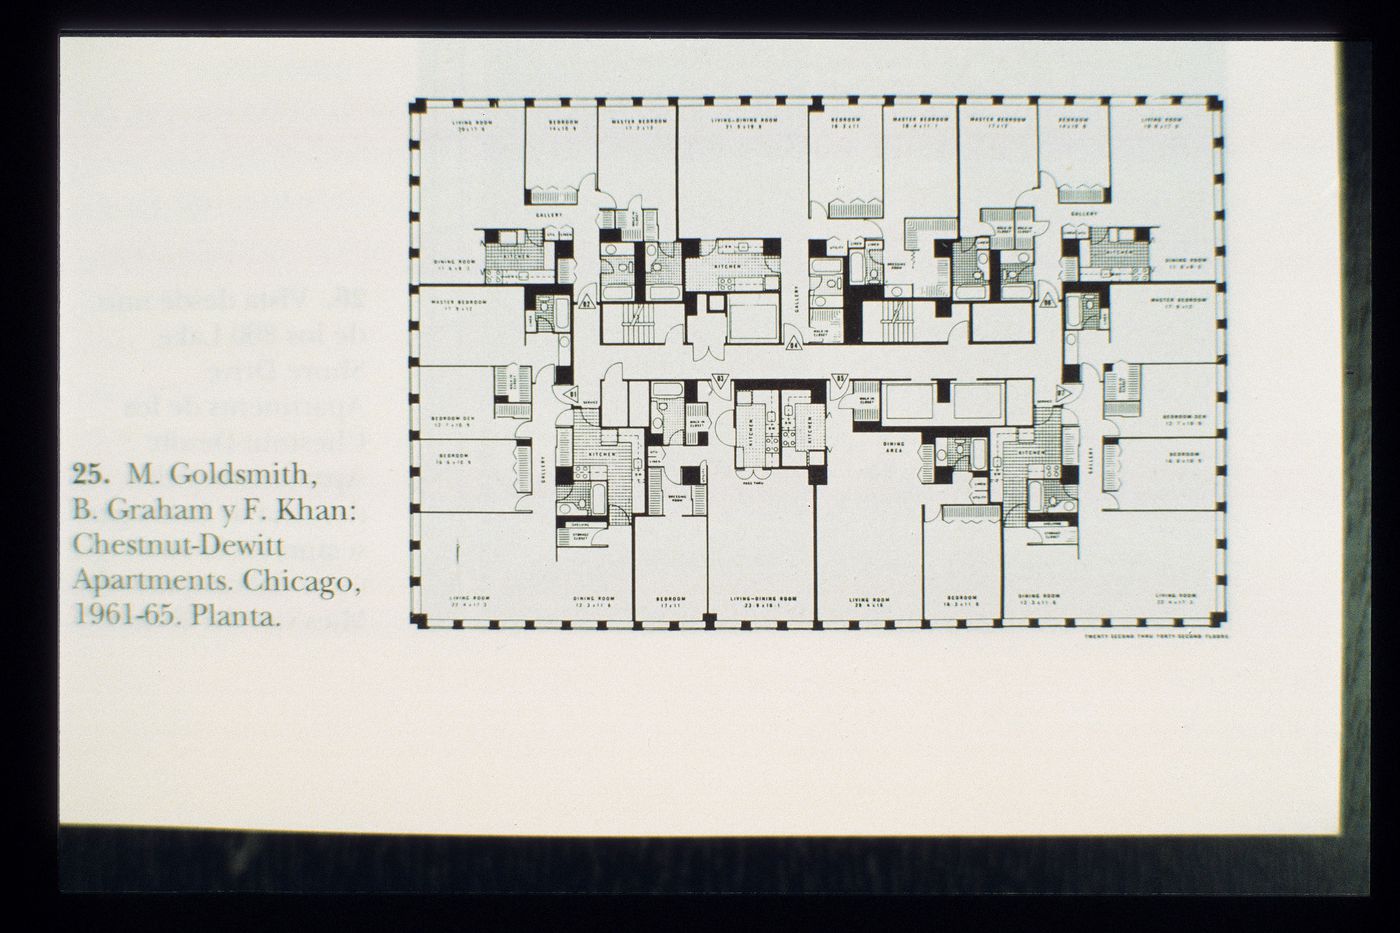 Slide of a drawing for Chestnut-DeWitt apartments, Chicago, by Myron Goldsmith, Bruce Graham and Fazlur Khan / SOM